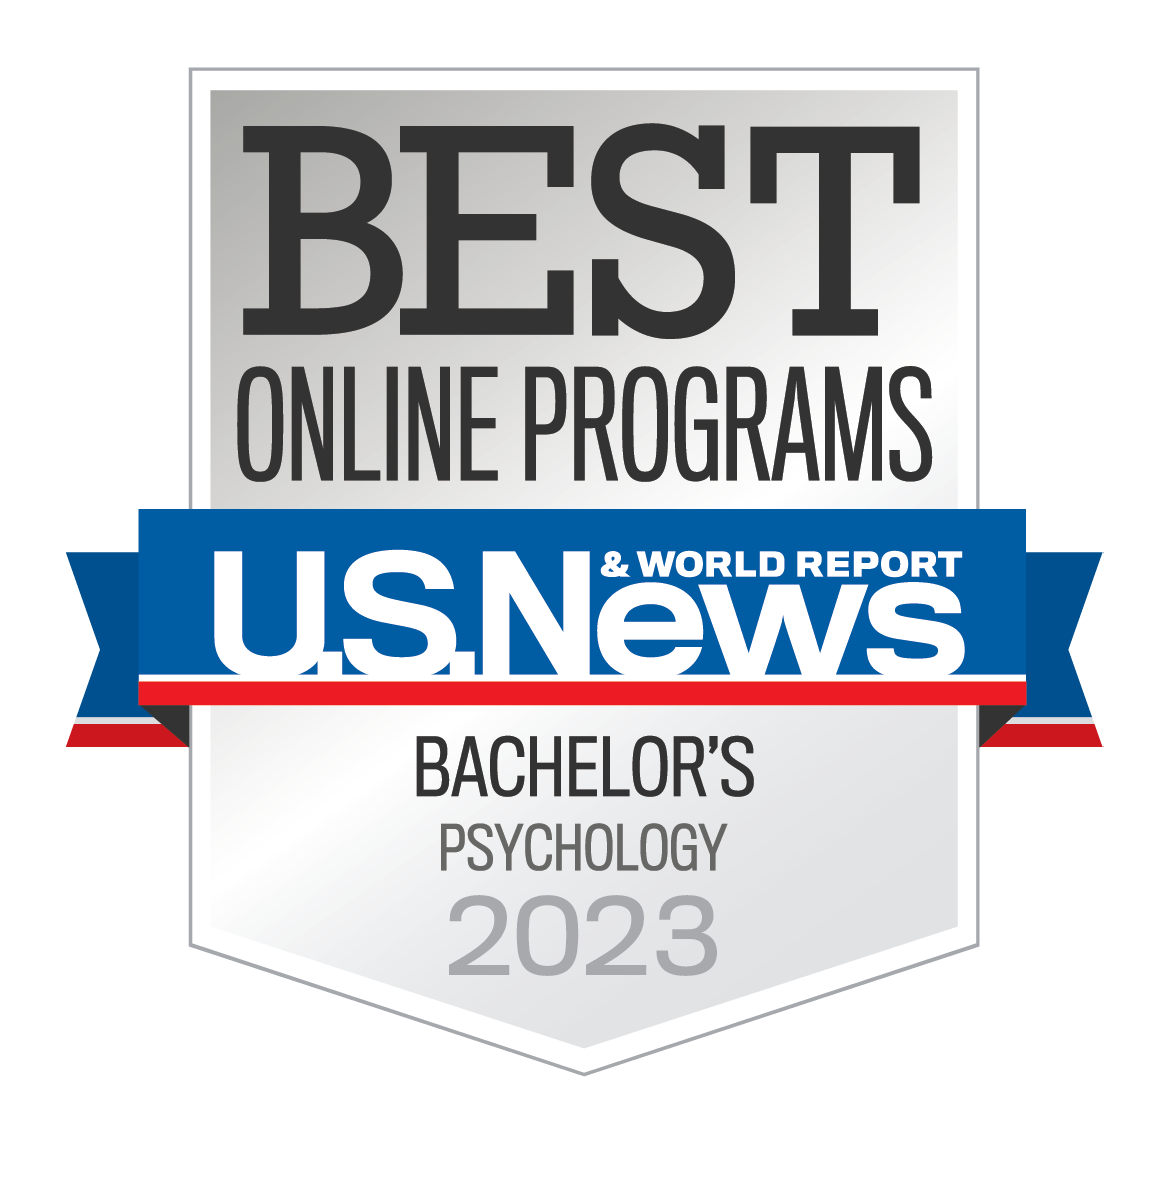 U.S. News and World reports. Best Online Programs: Bachelor's of Psychology 2023